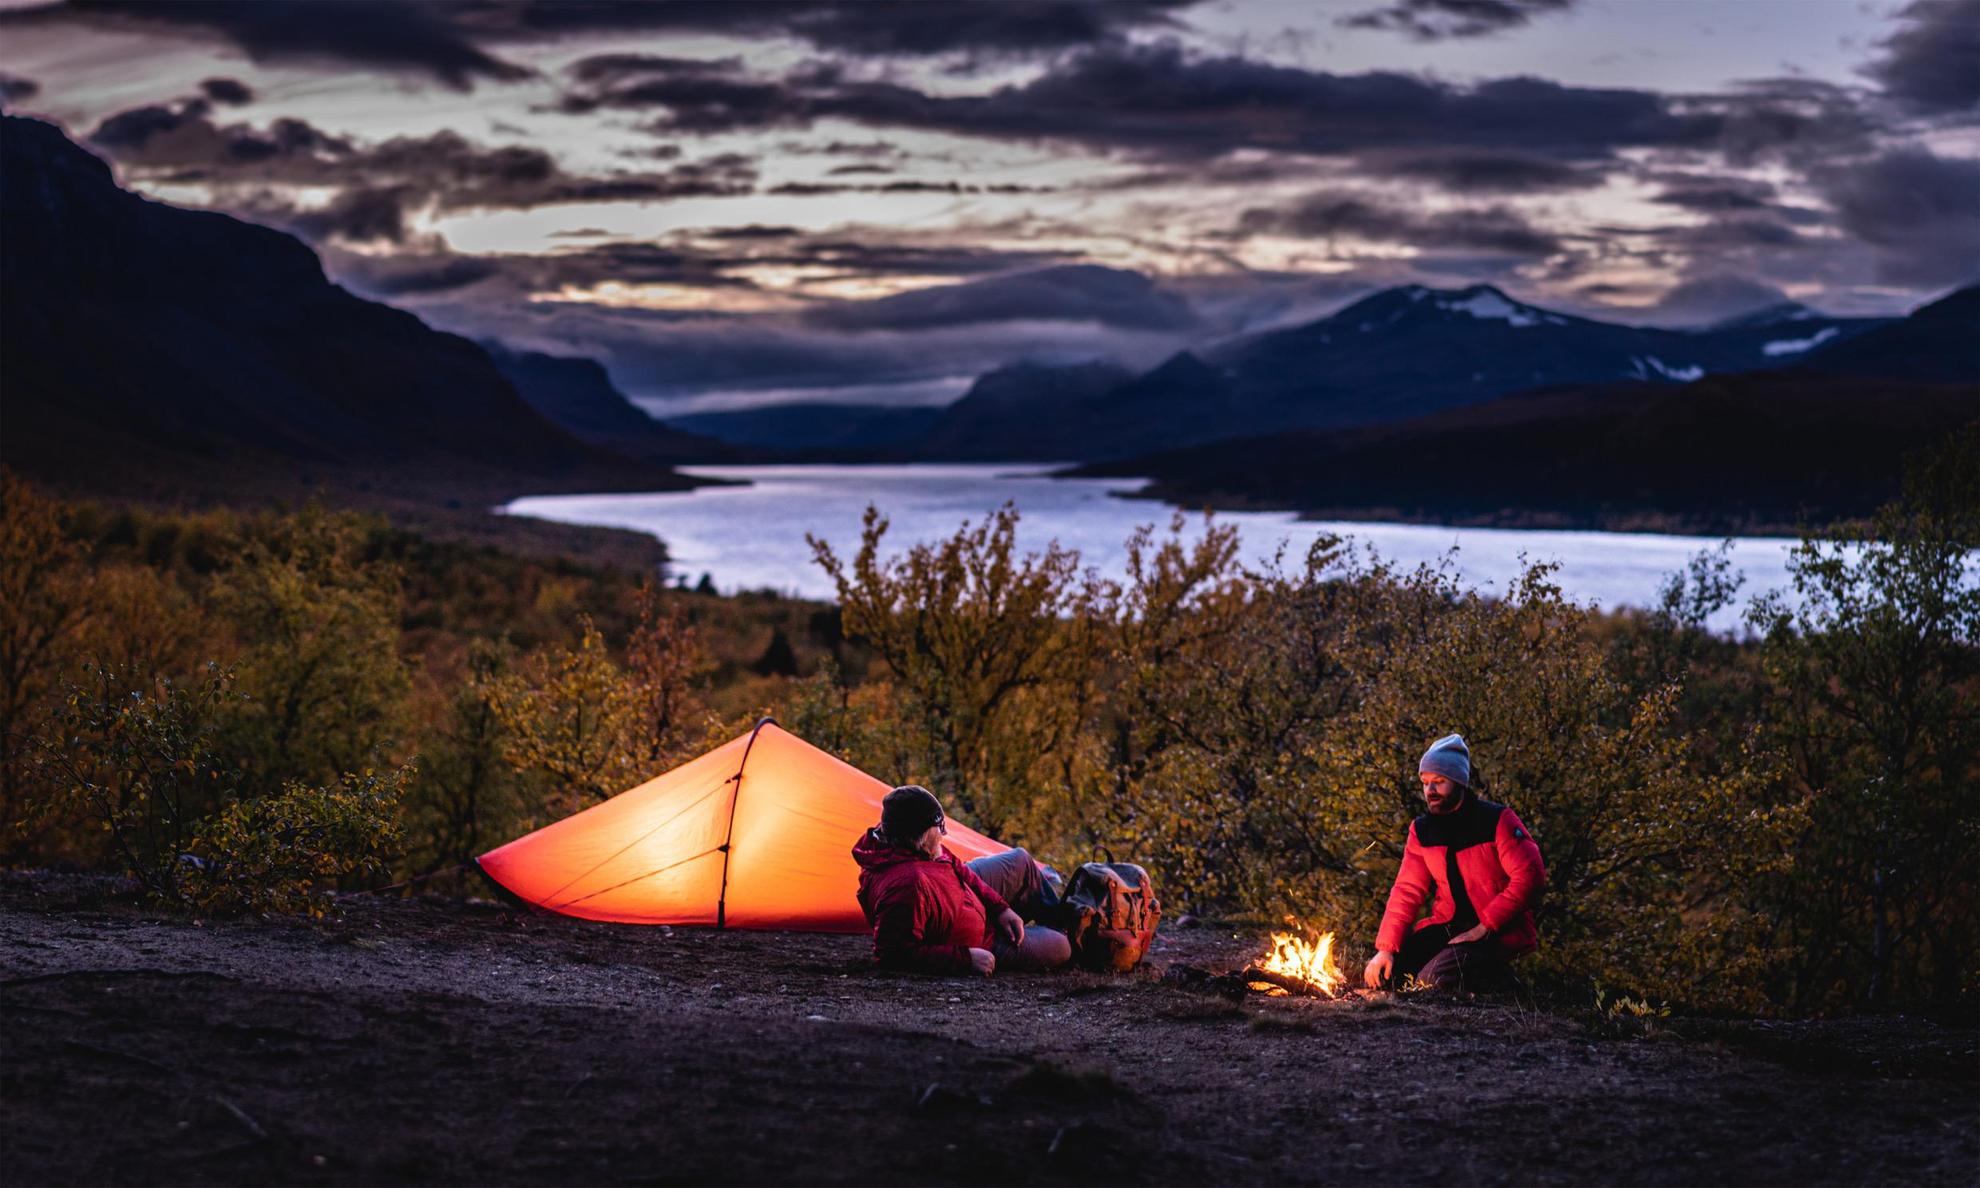 Two people sitting next to a tent and a camp fire. A river and mountains are in the background.